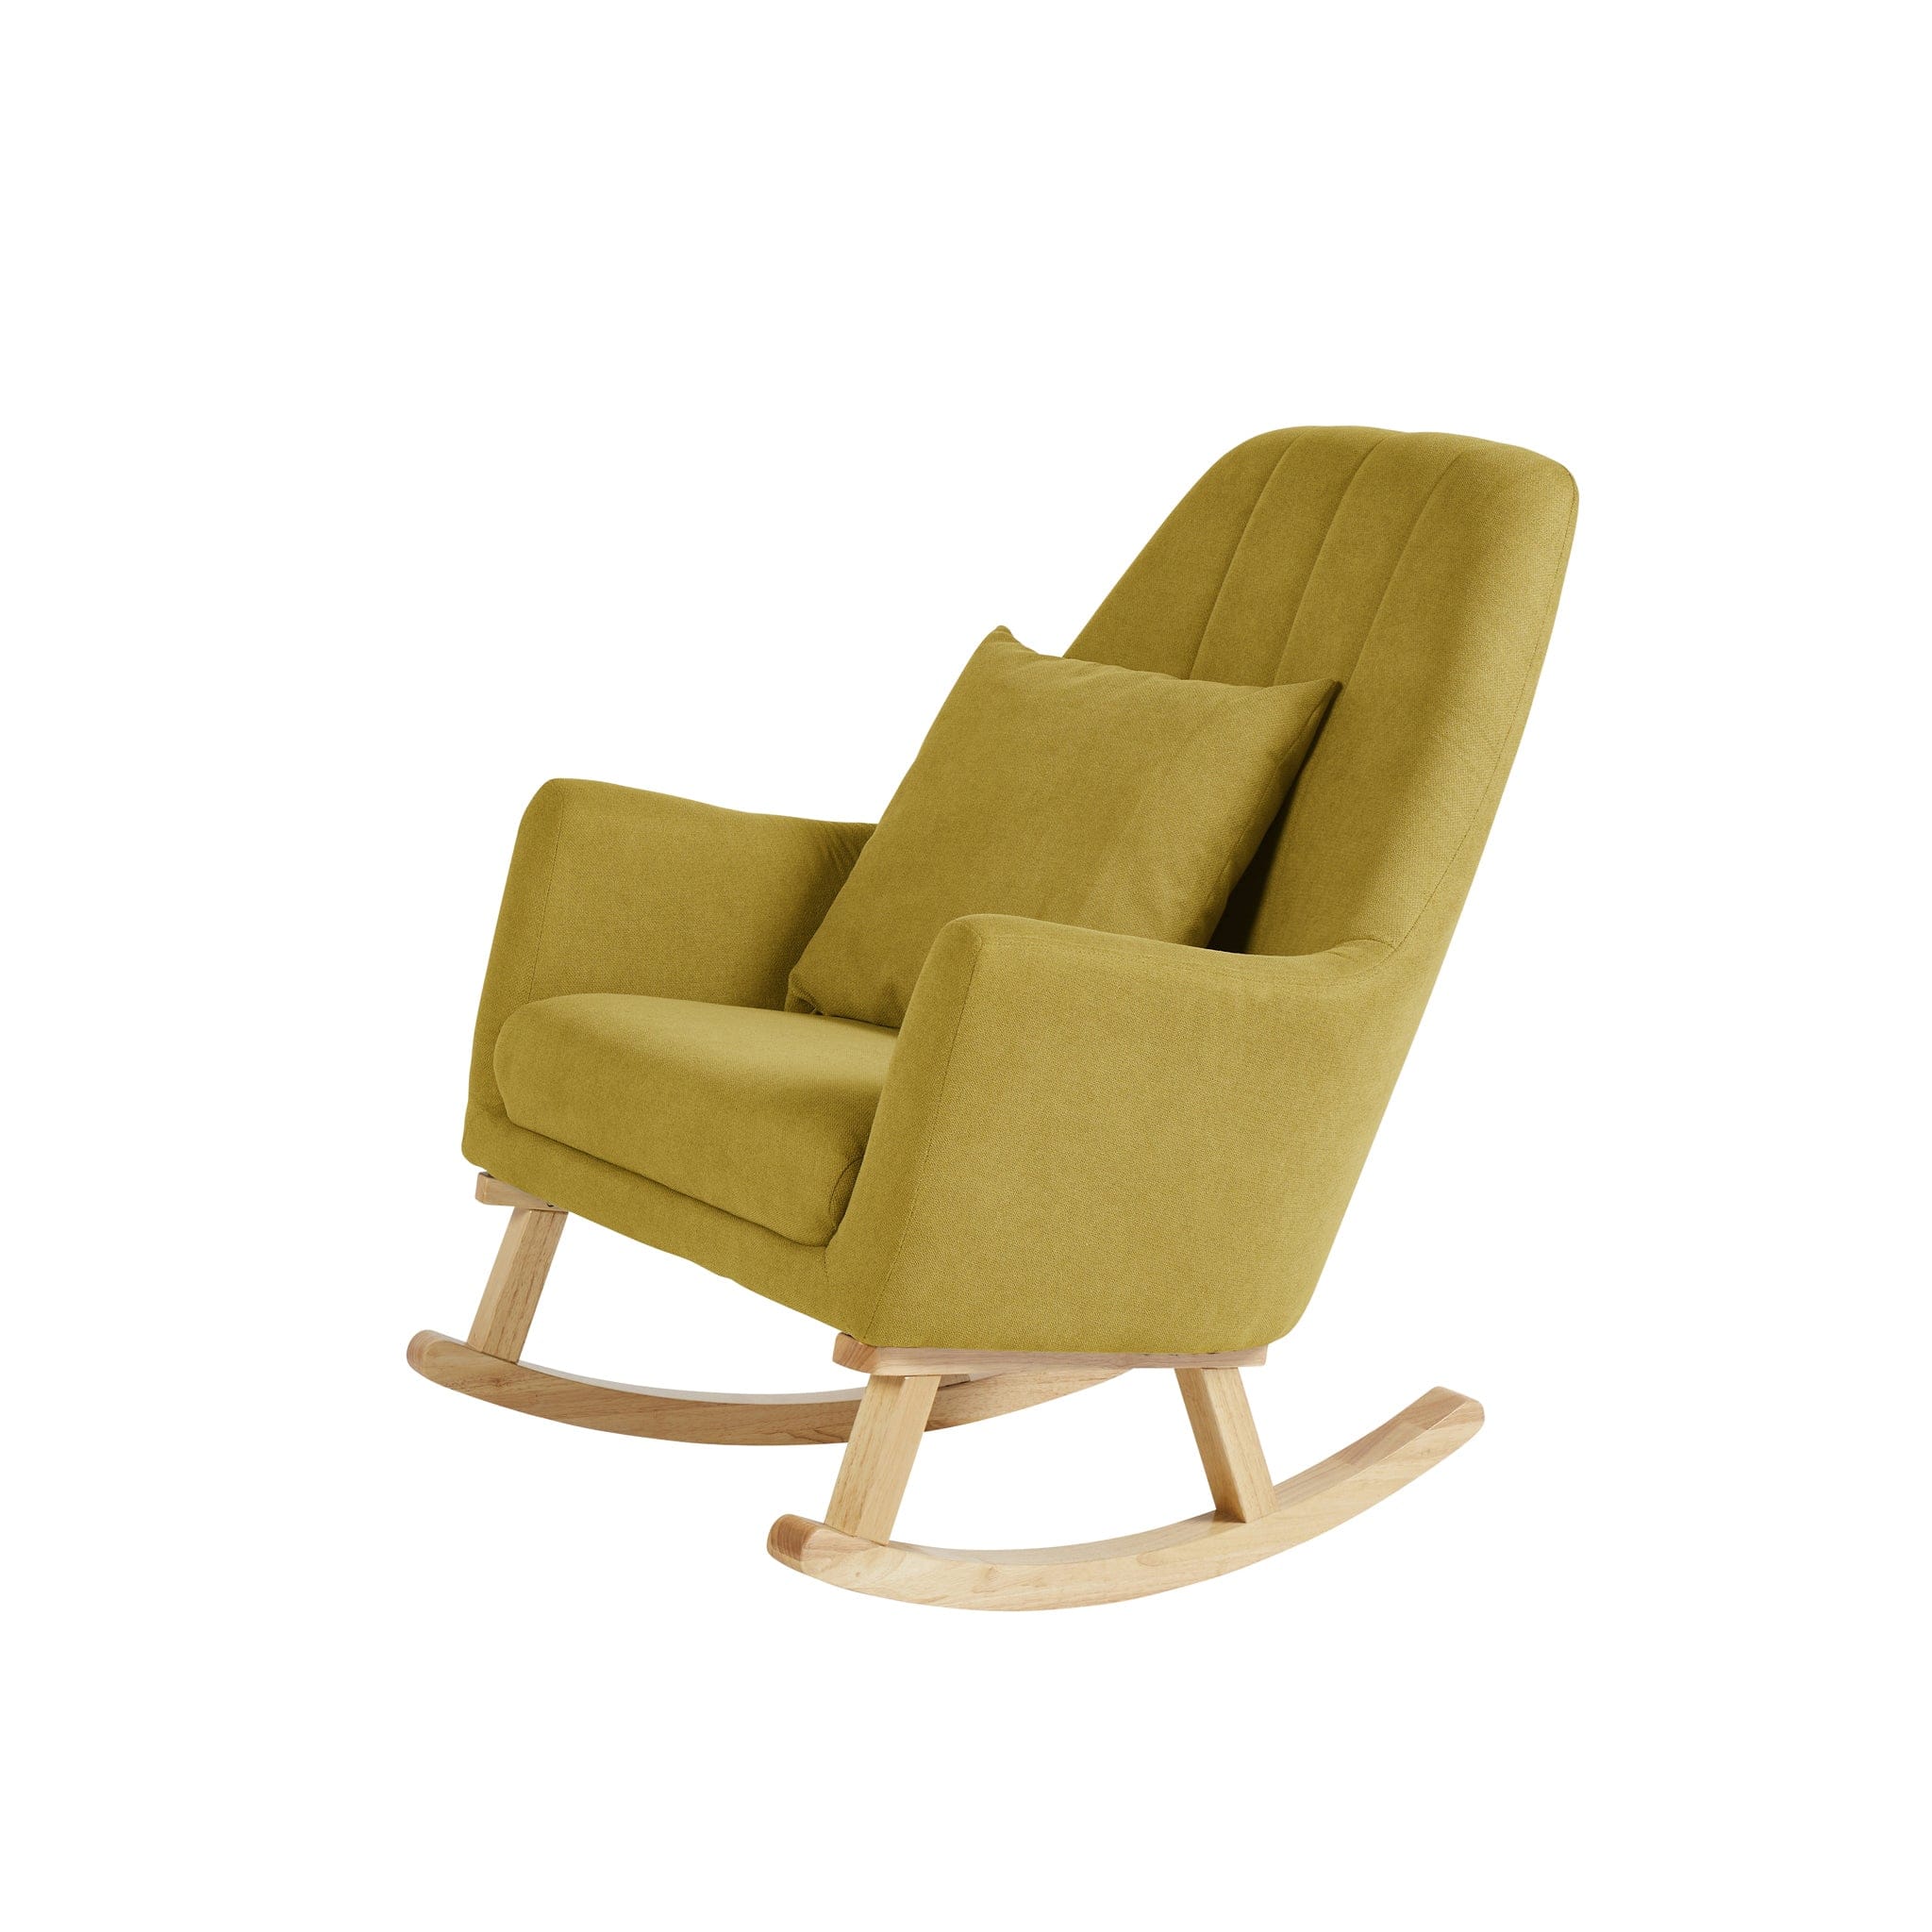 Ickle Bubba Nursing Chairs Ickle Bubba Eden Deluxe Nursery Chair and Stool Ochre 48-008-000-845